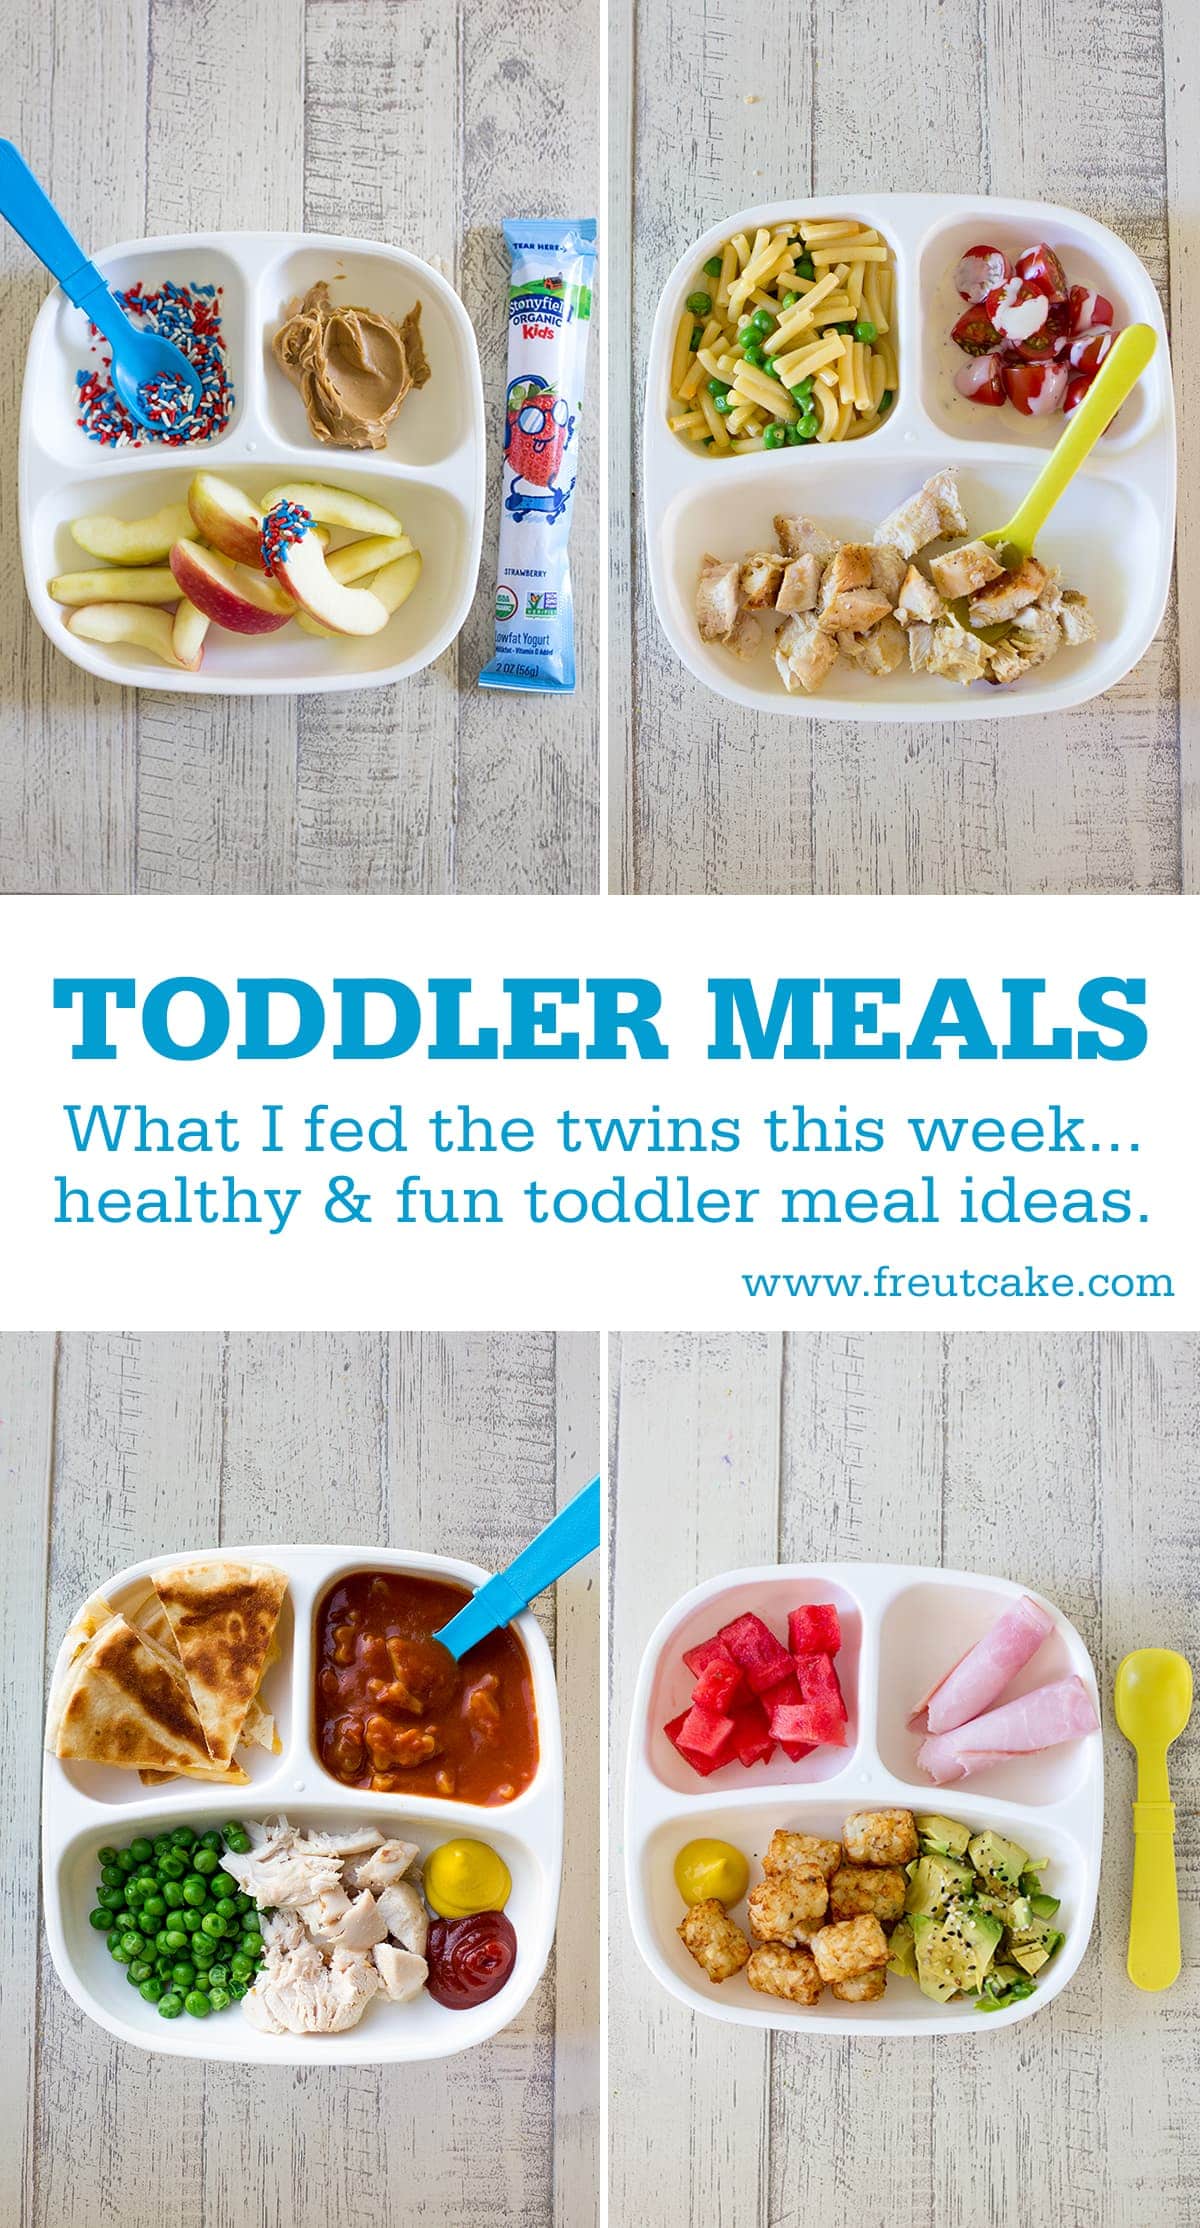 https://www.freutcake.com/wp-content/uploads/2018/07/Toddler-Meals-what-I-fed-the-twins-this-week.jpg